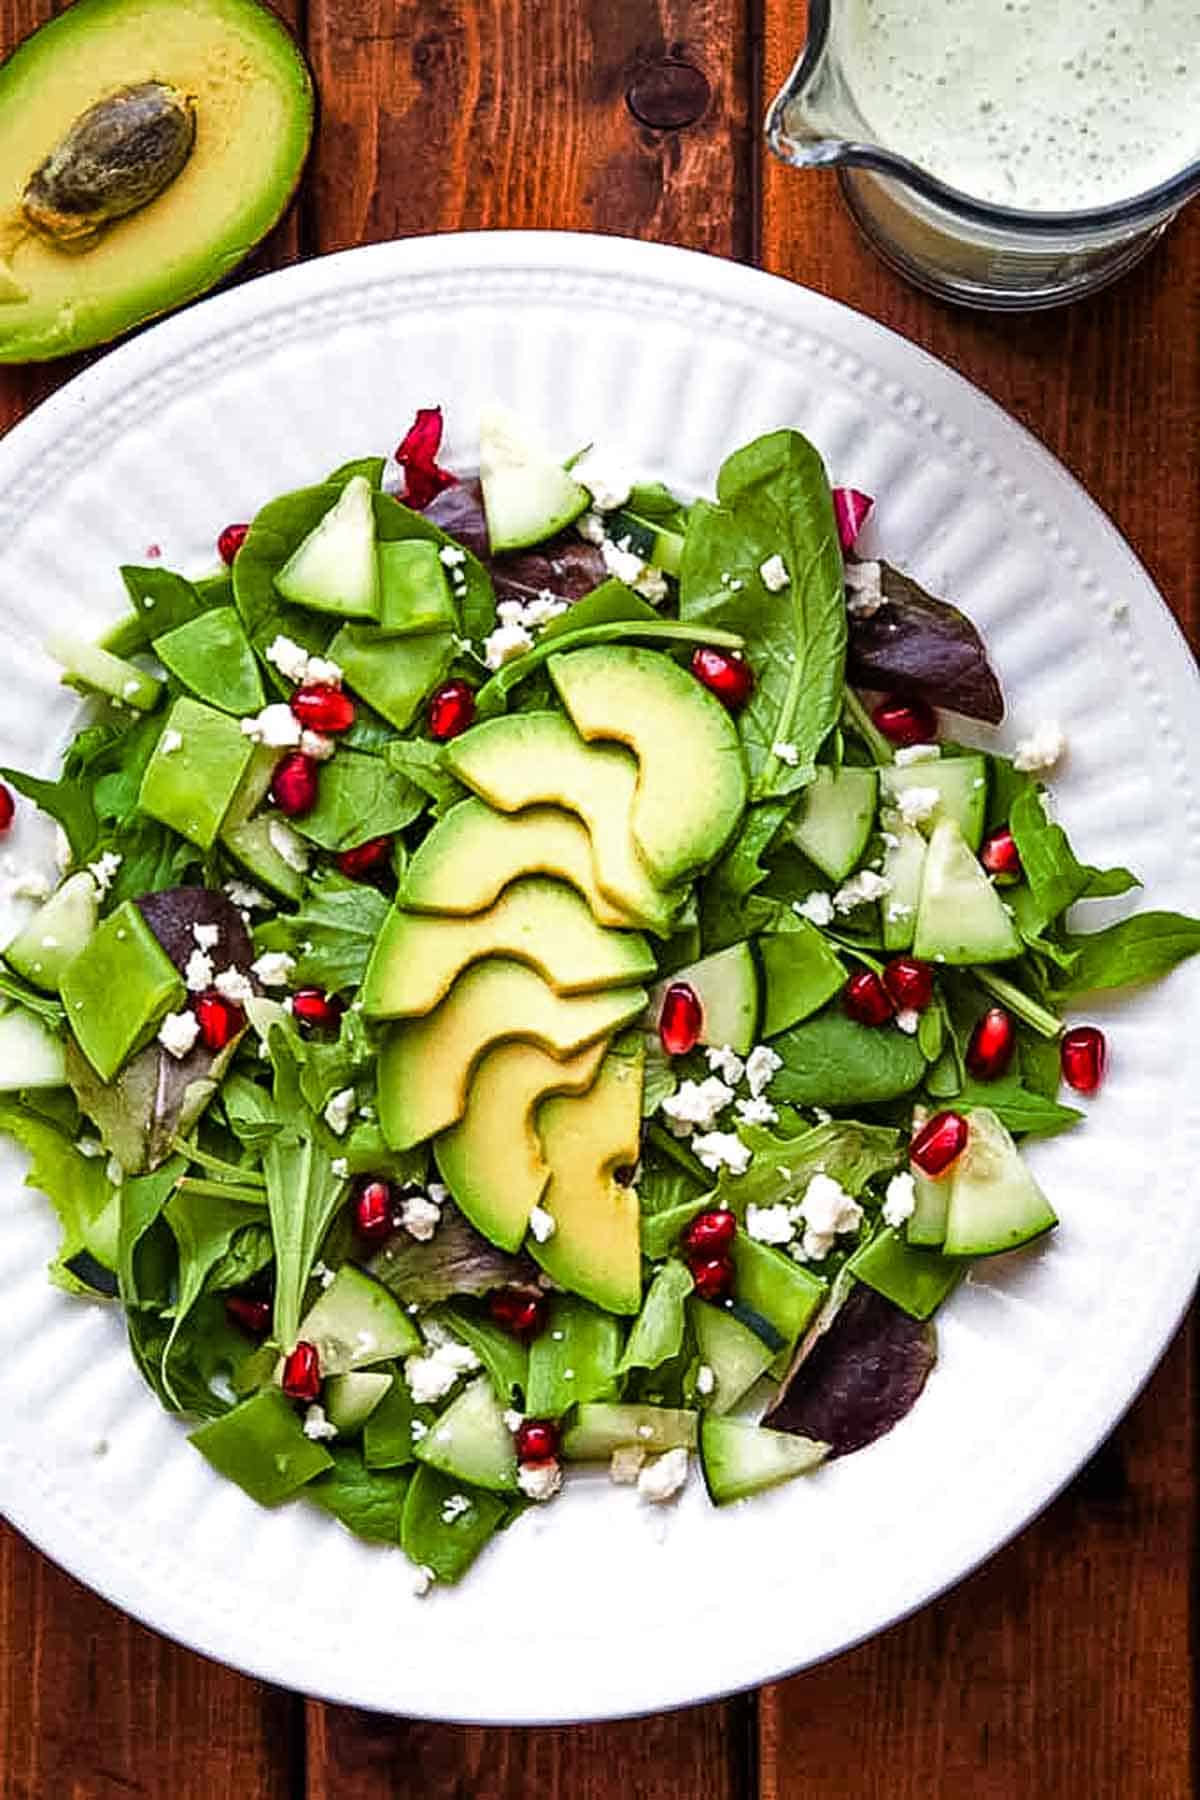 green salad with avocado and green goddess dressing on the side